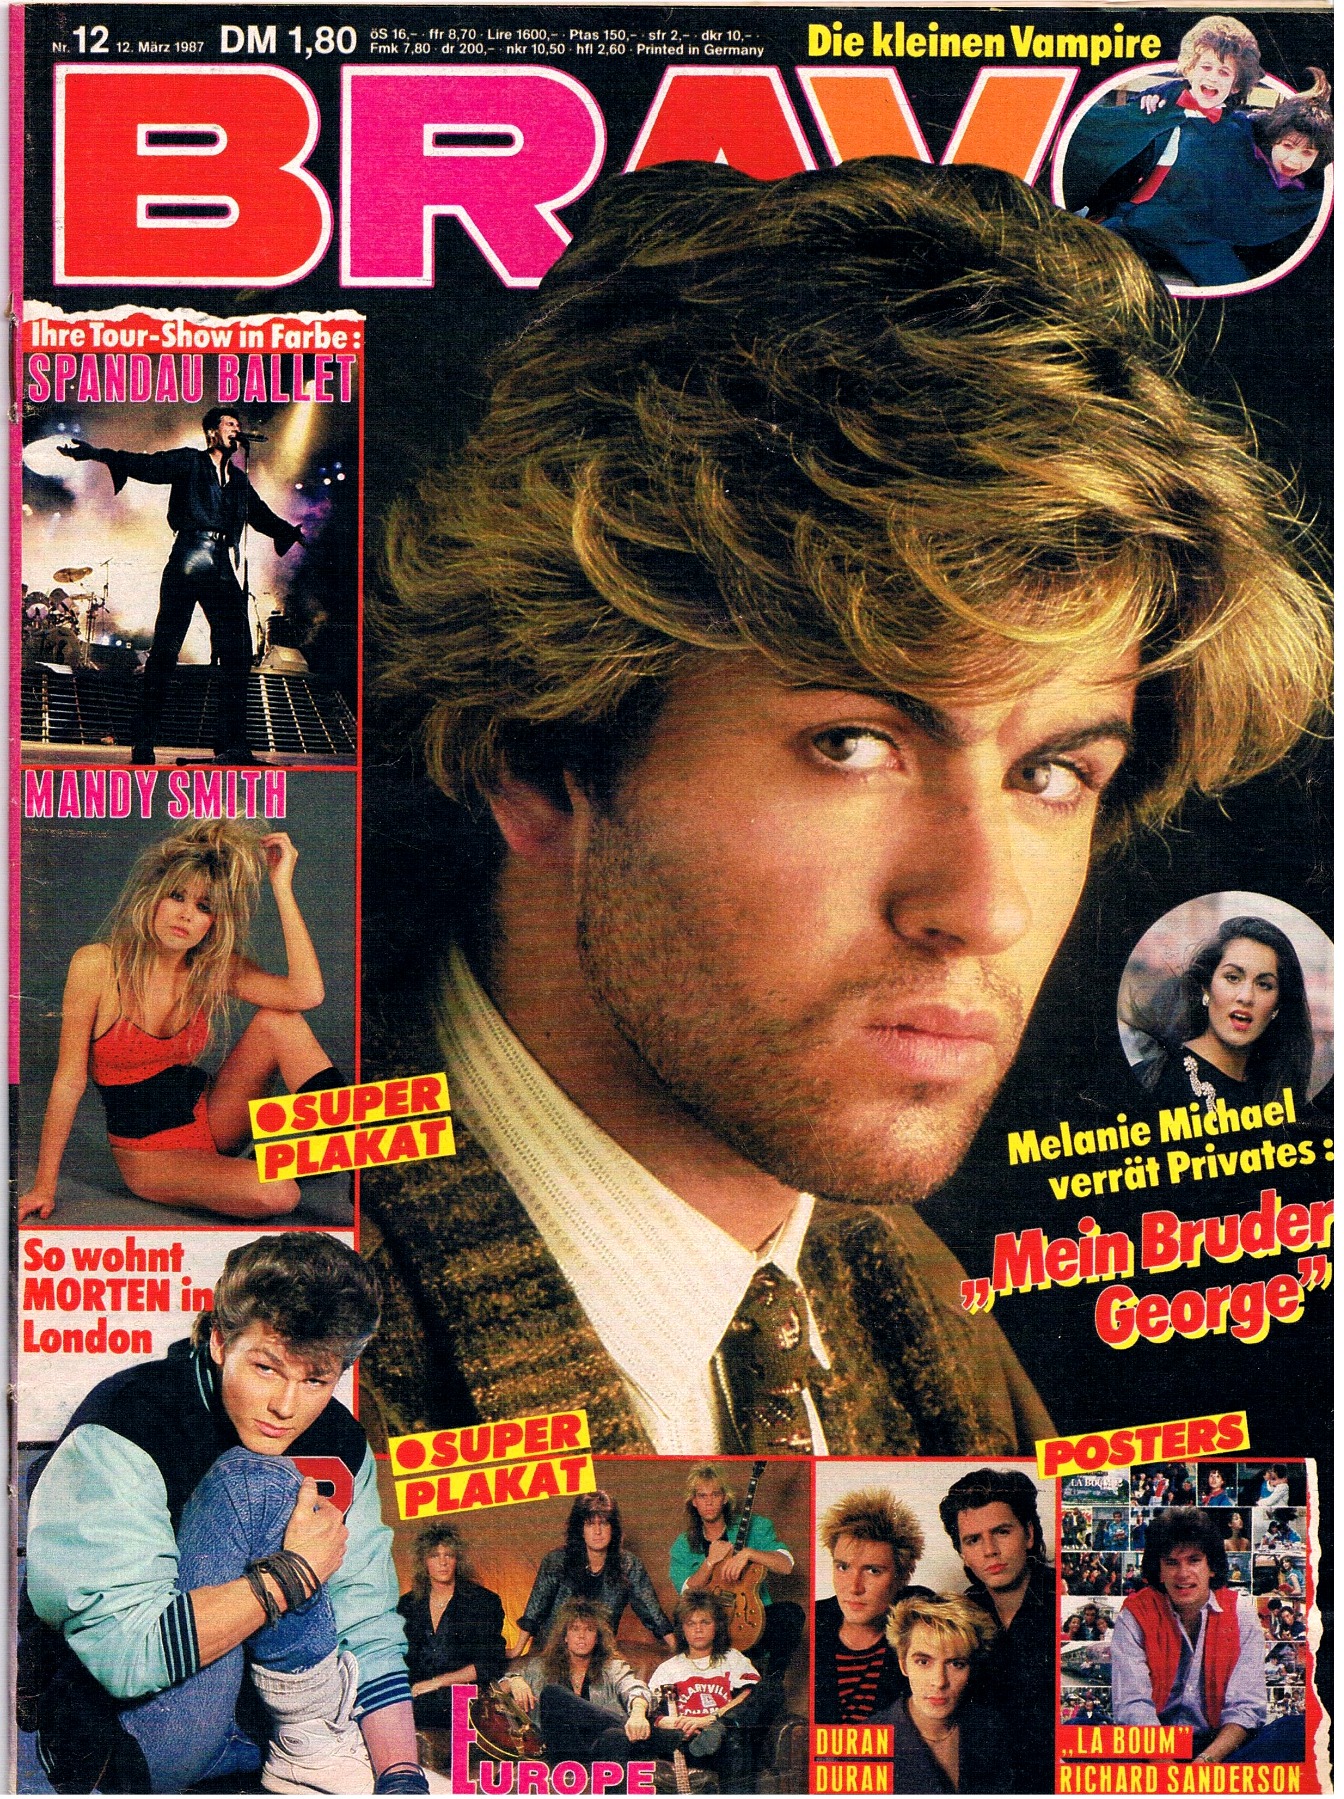 Bravo - No. 12 - march 12, 1987 87 Completely